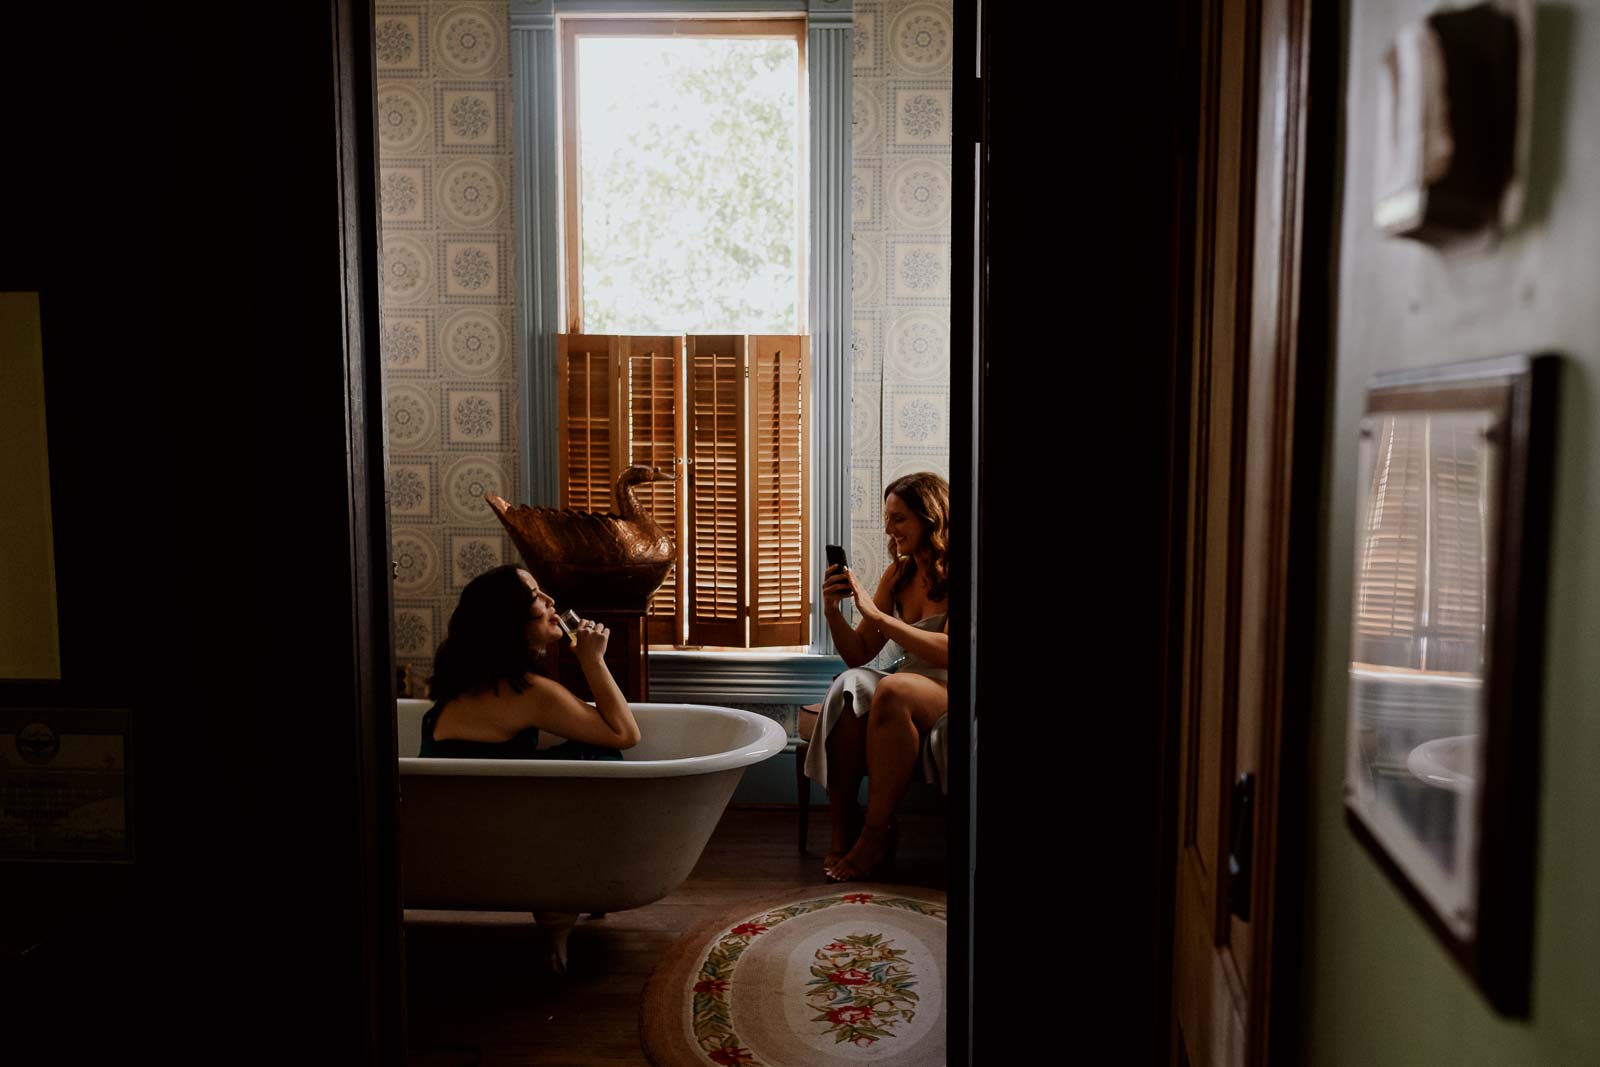 A bridesmaid sitting in the tub poses for an iPhone click